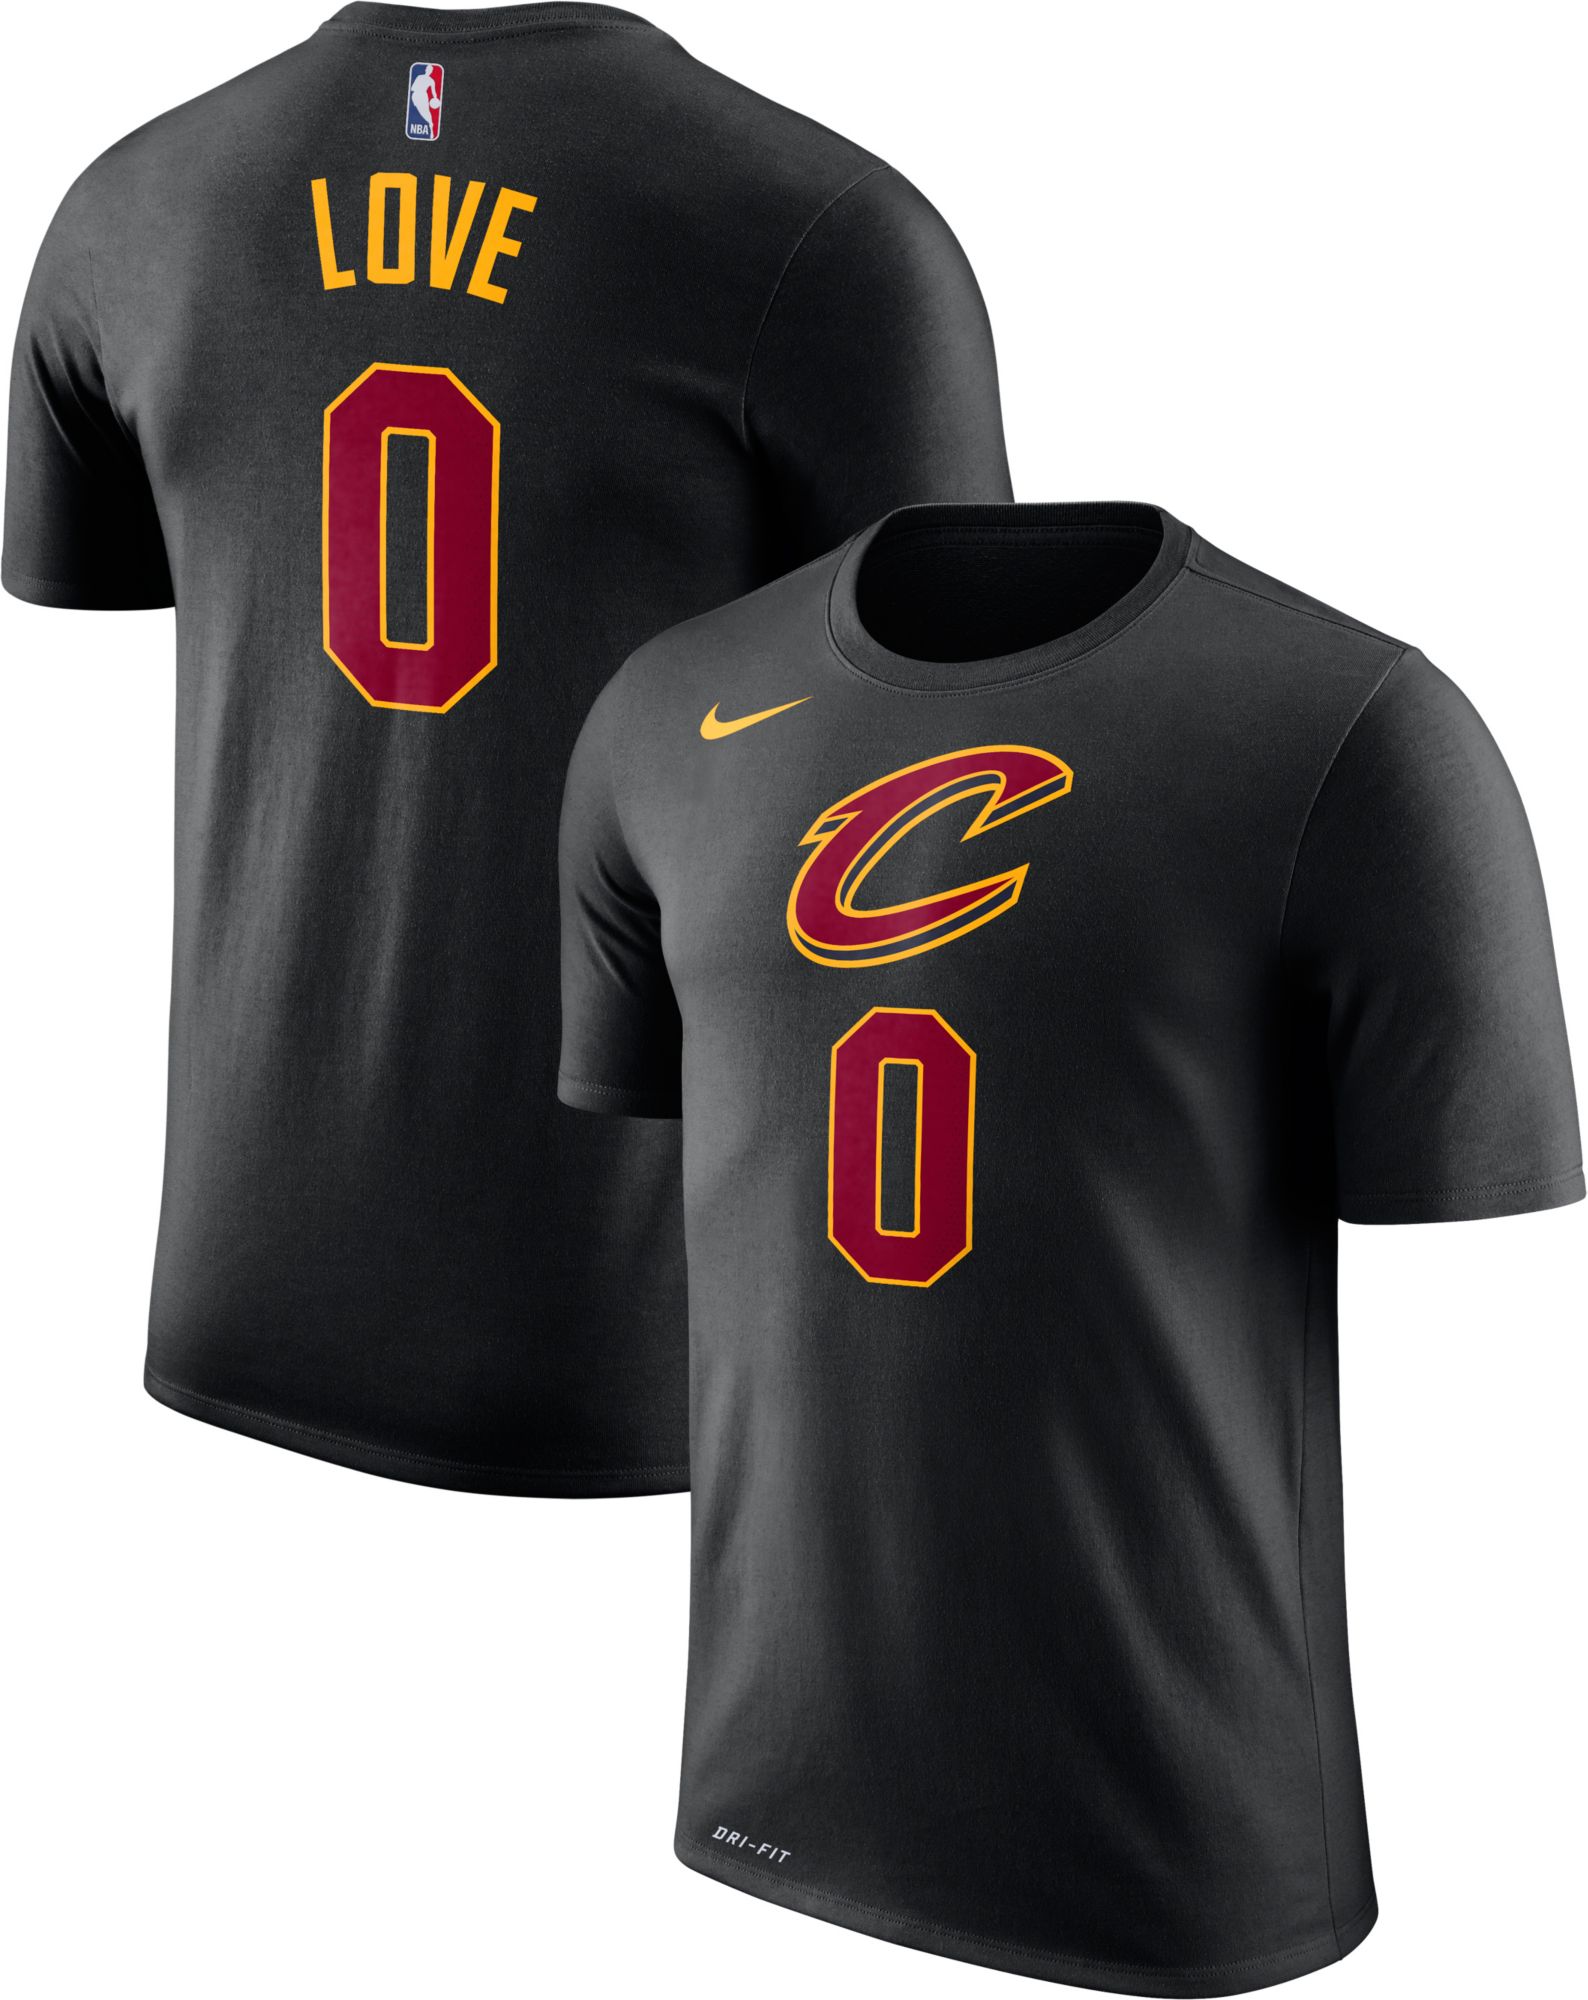 kevin love youth jersey